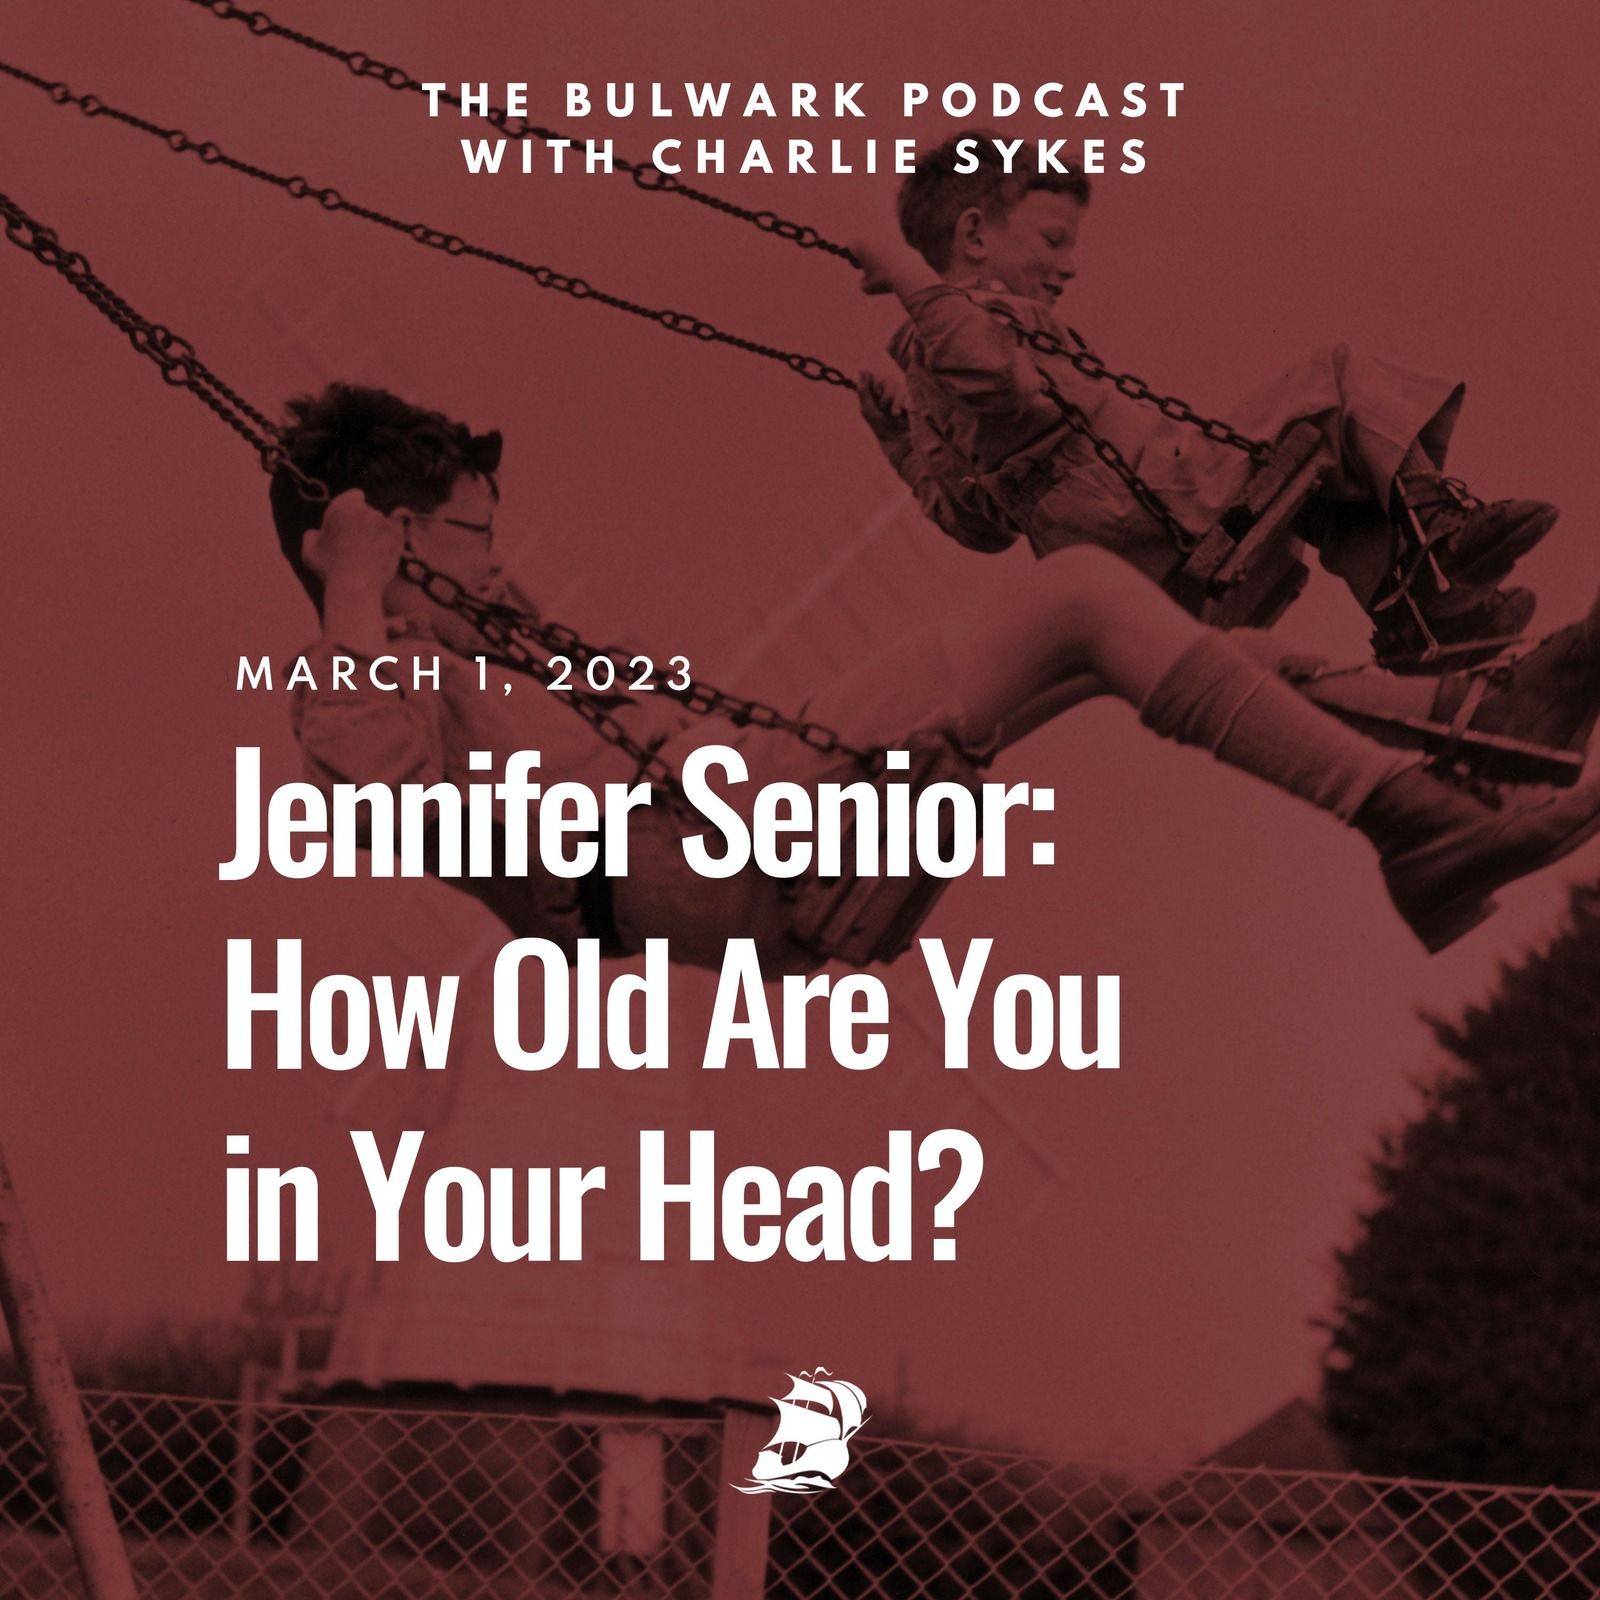 Jennifer Senior: How Old Are You in Your Head? by The Bulwark Podcast